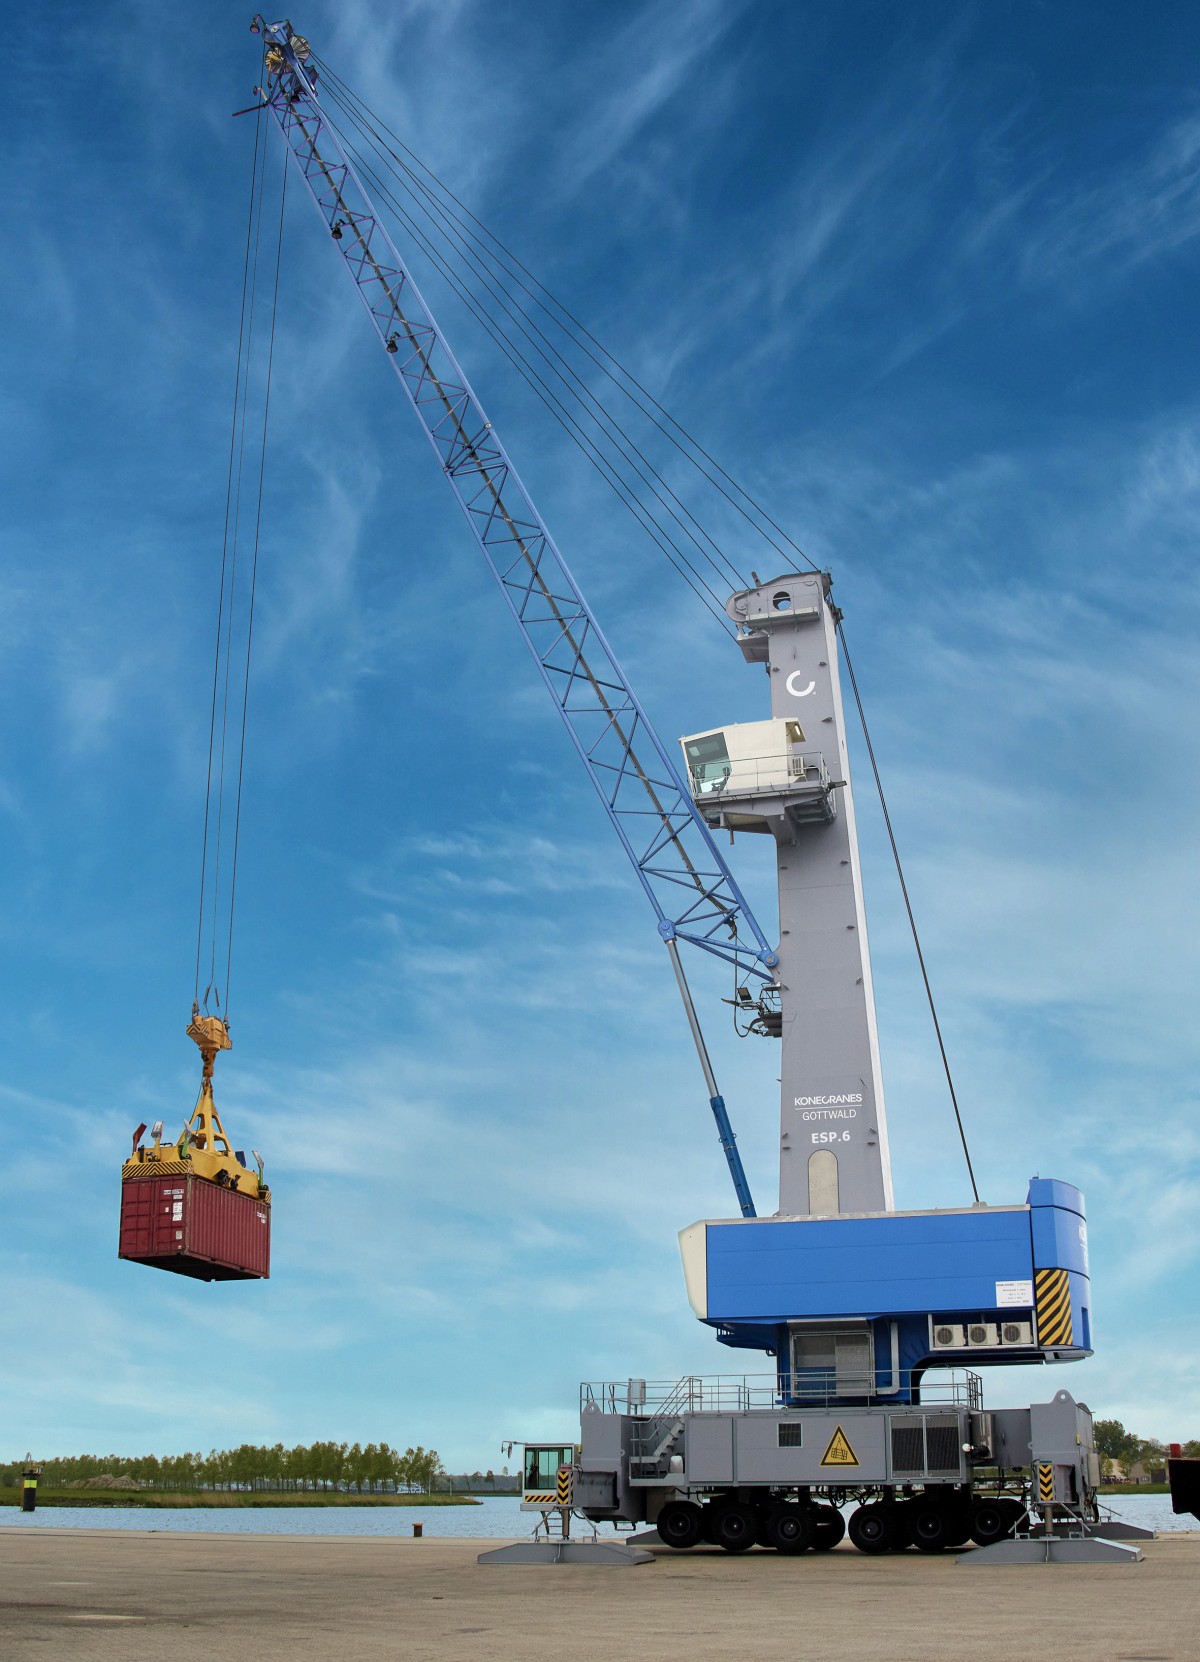 Konecranes' first mobile harbor cranes to support Port of Georgetown’s growth